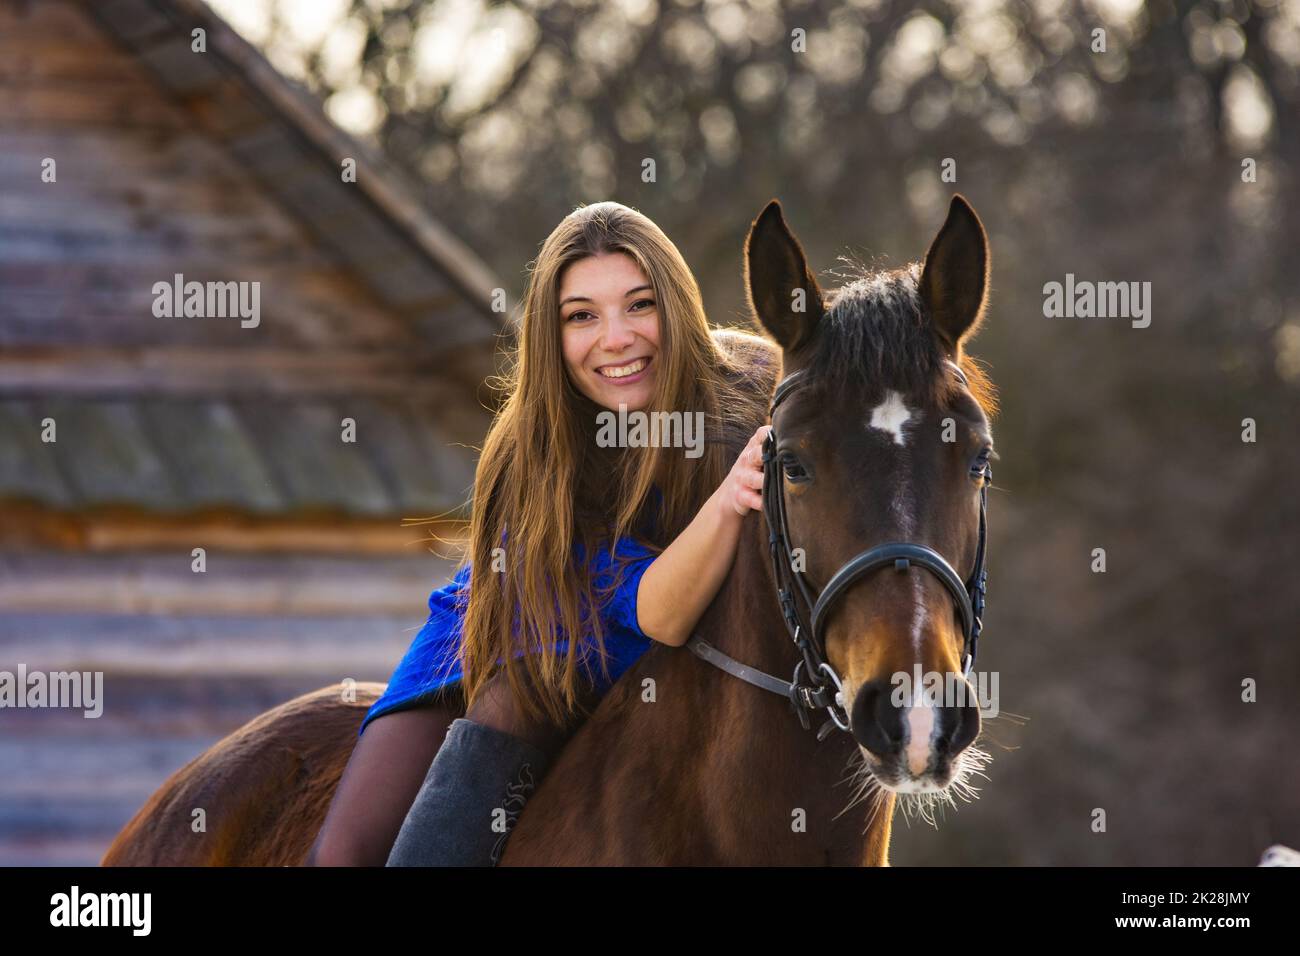 Girl in a blue dress on a beautiful horse Stock Photo